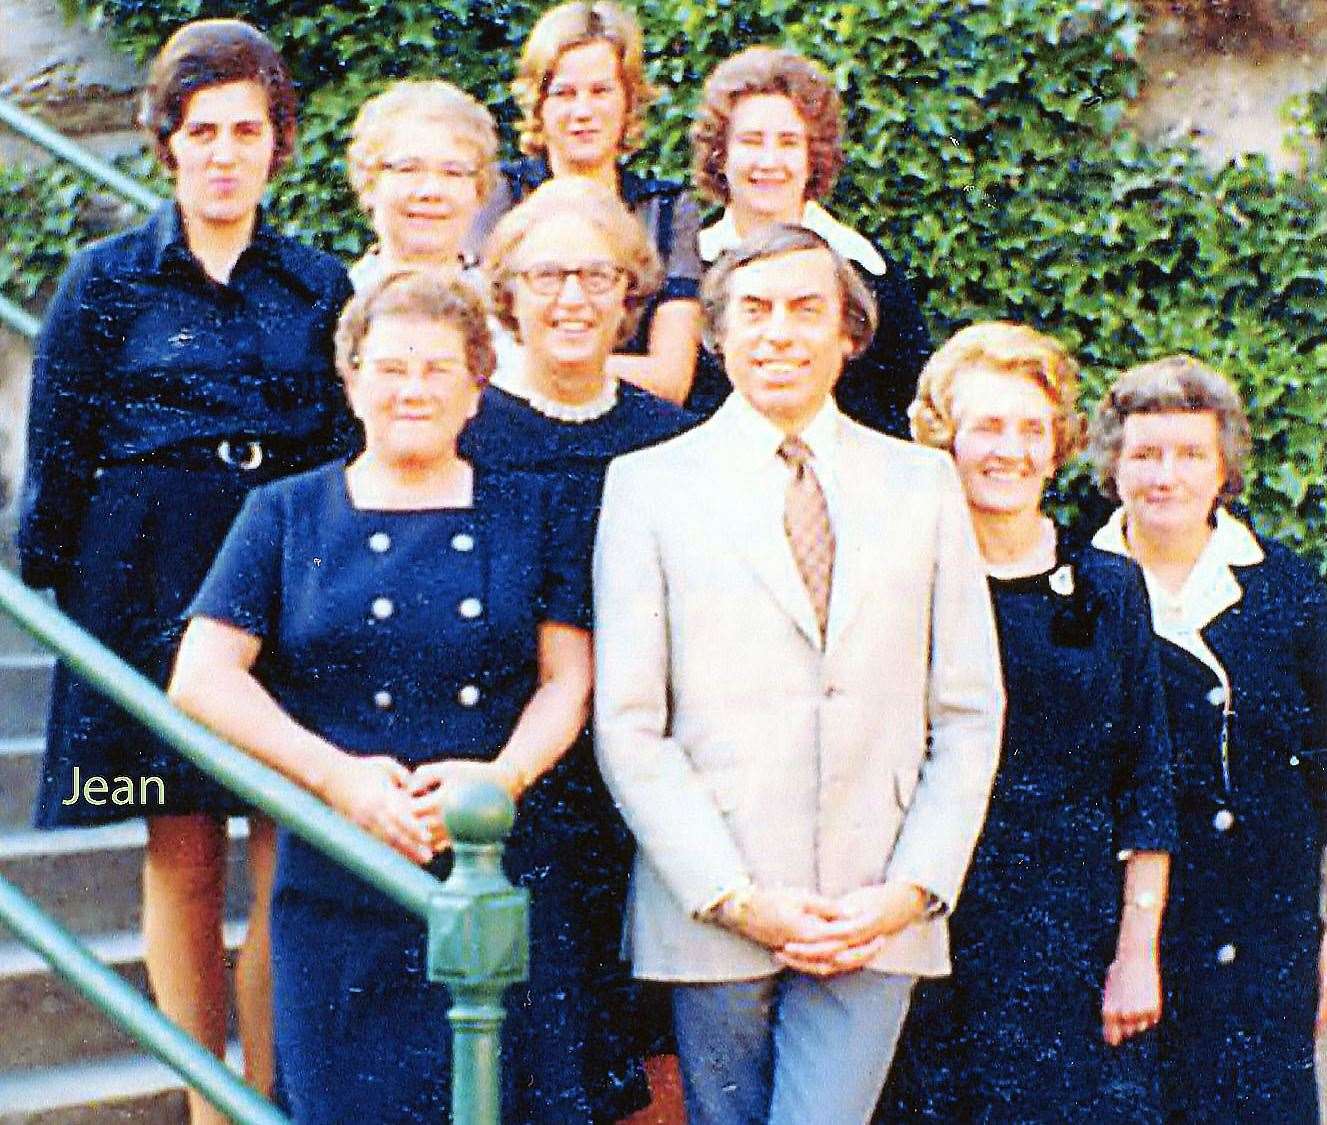 Jean (top left) and her usherettes with comedian Larry Grayson